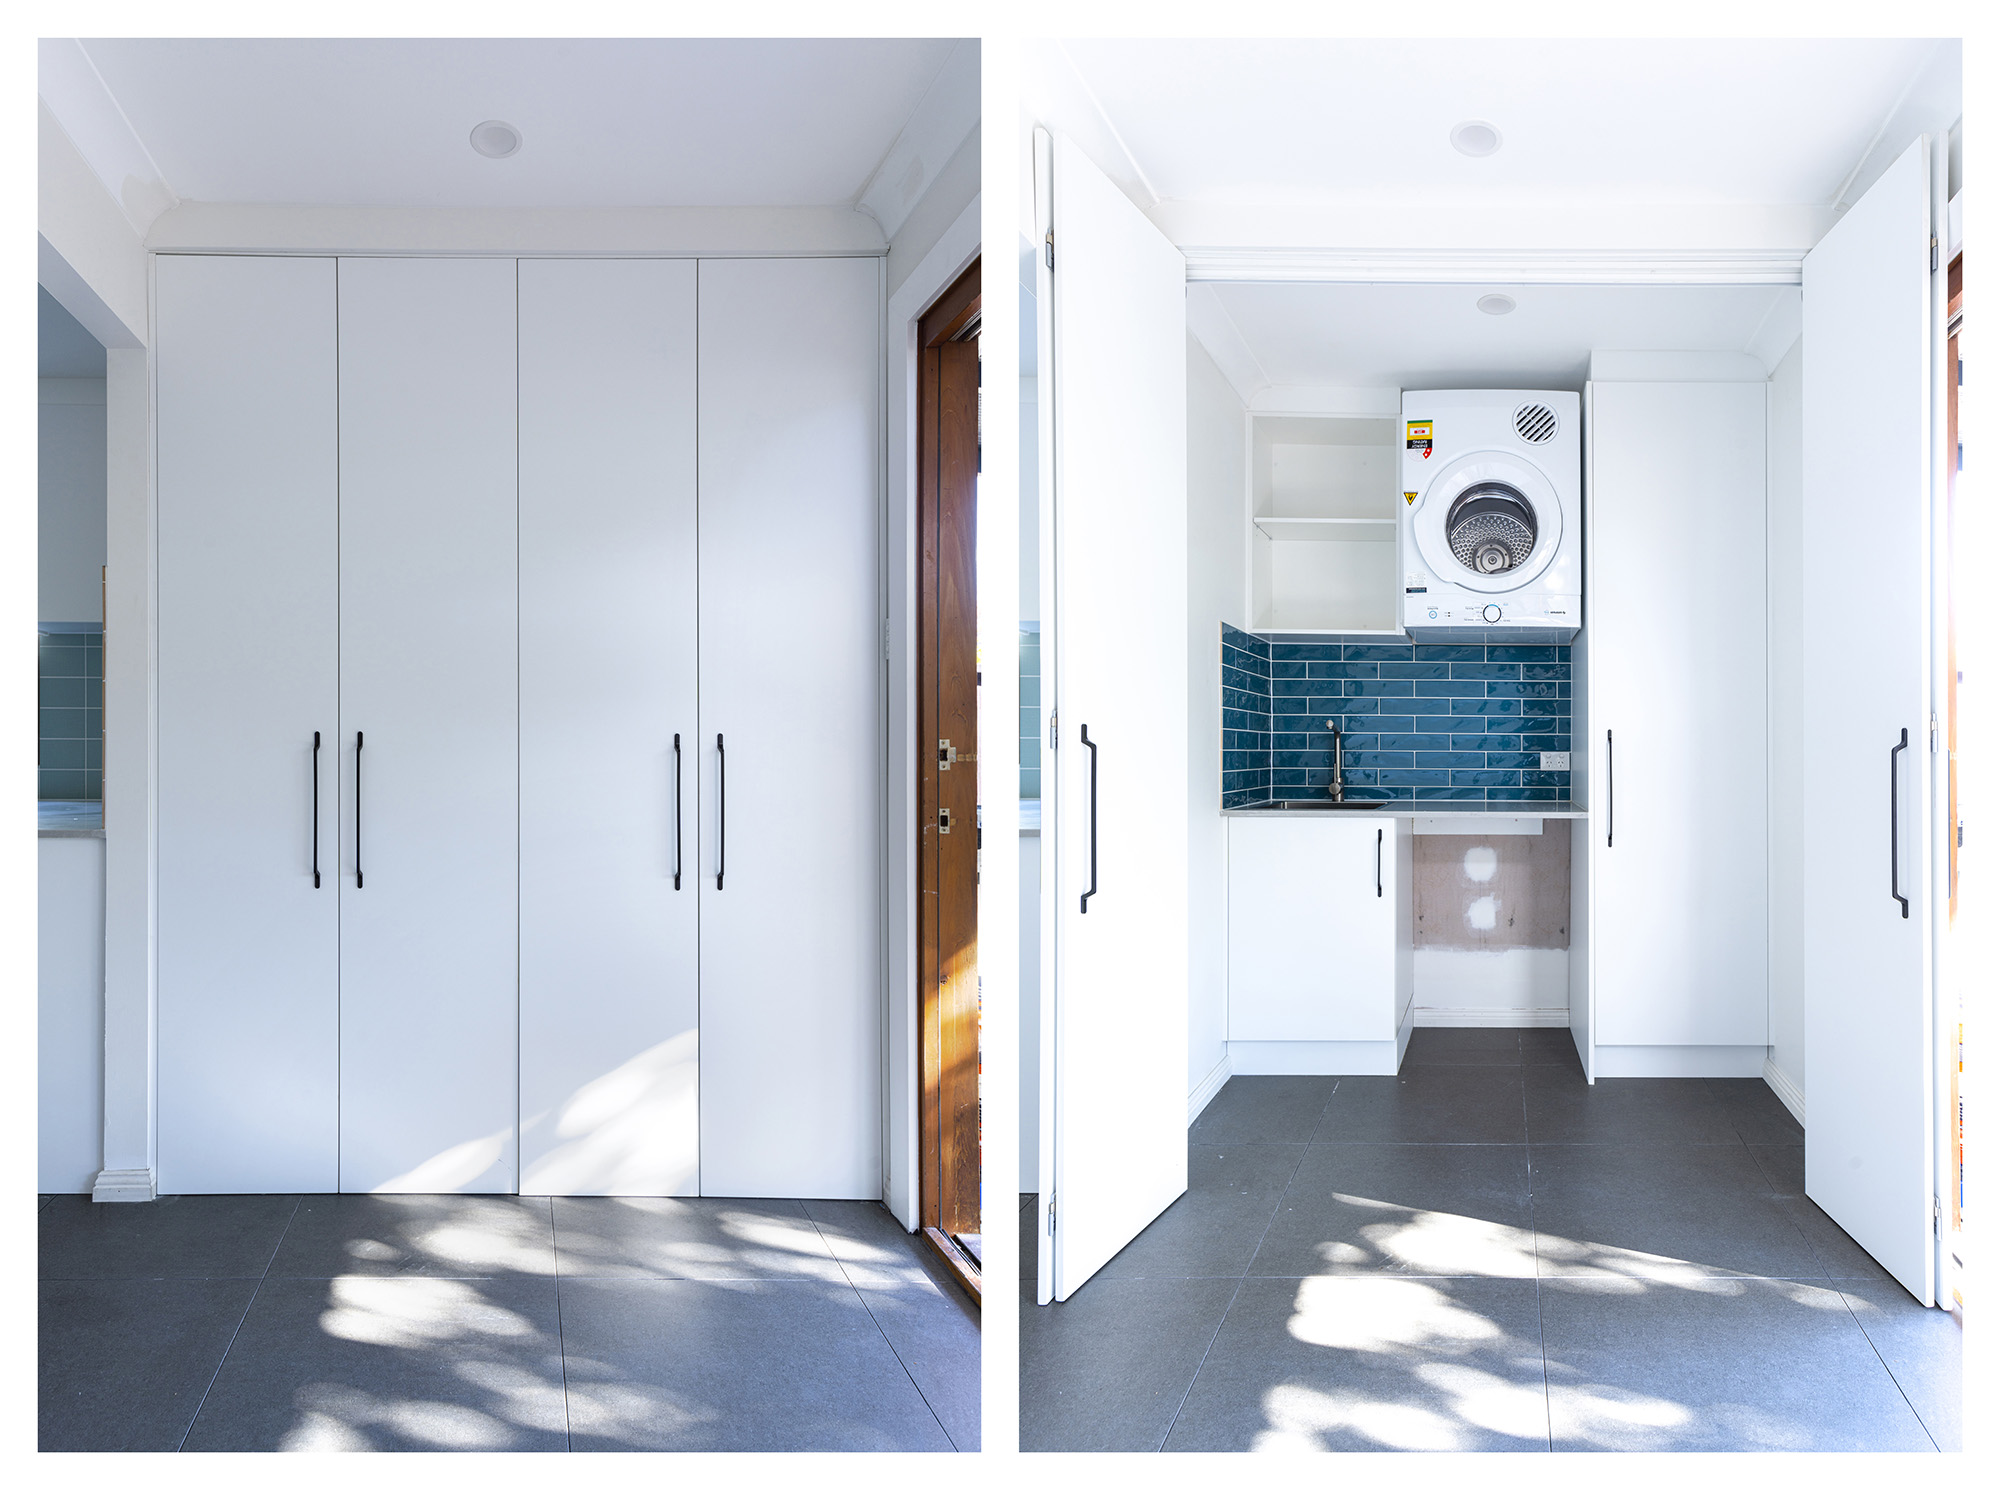 7 LAUNDRY ROOM IDEAS FOR YOUR NEXT RENOVATION